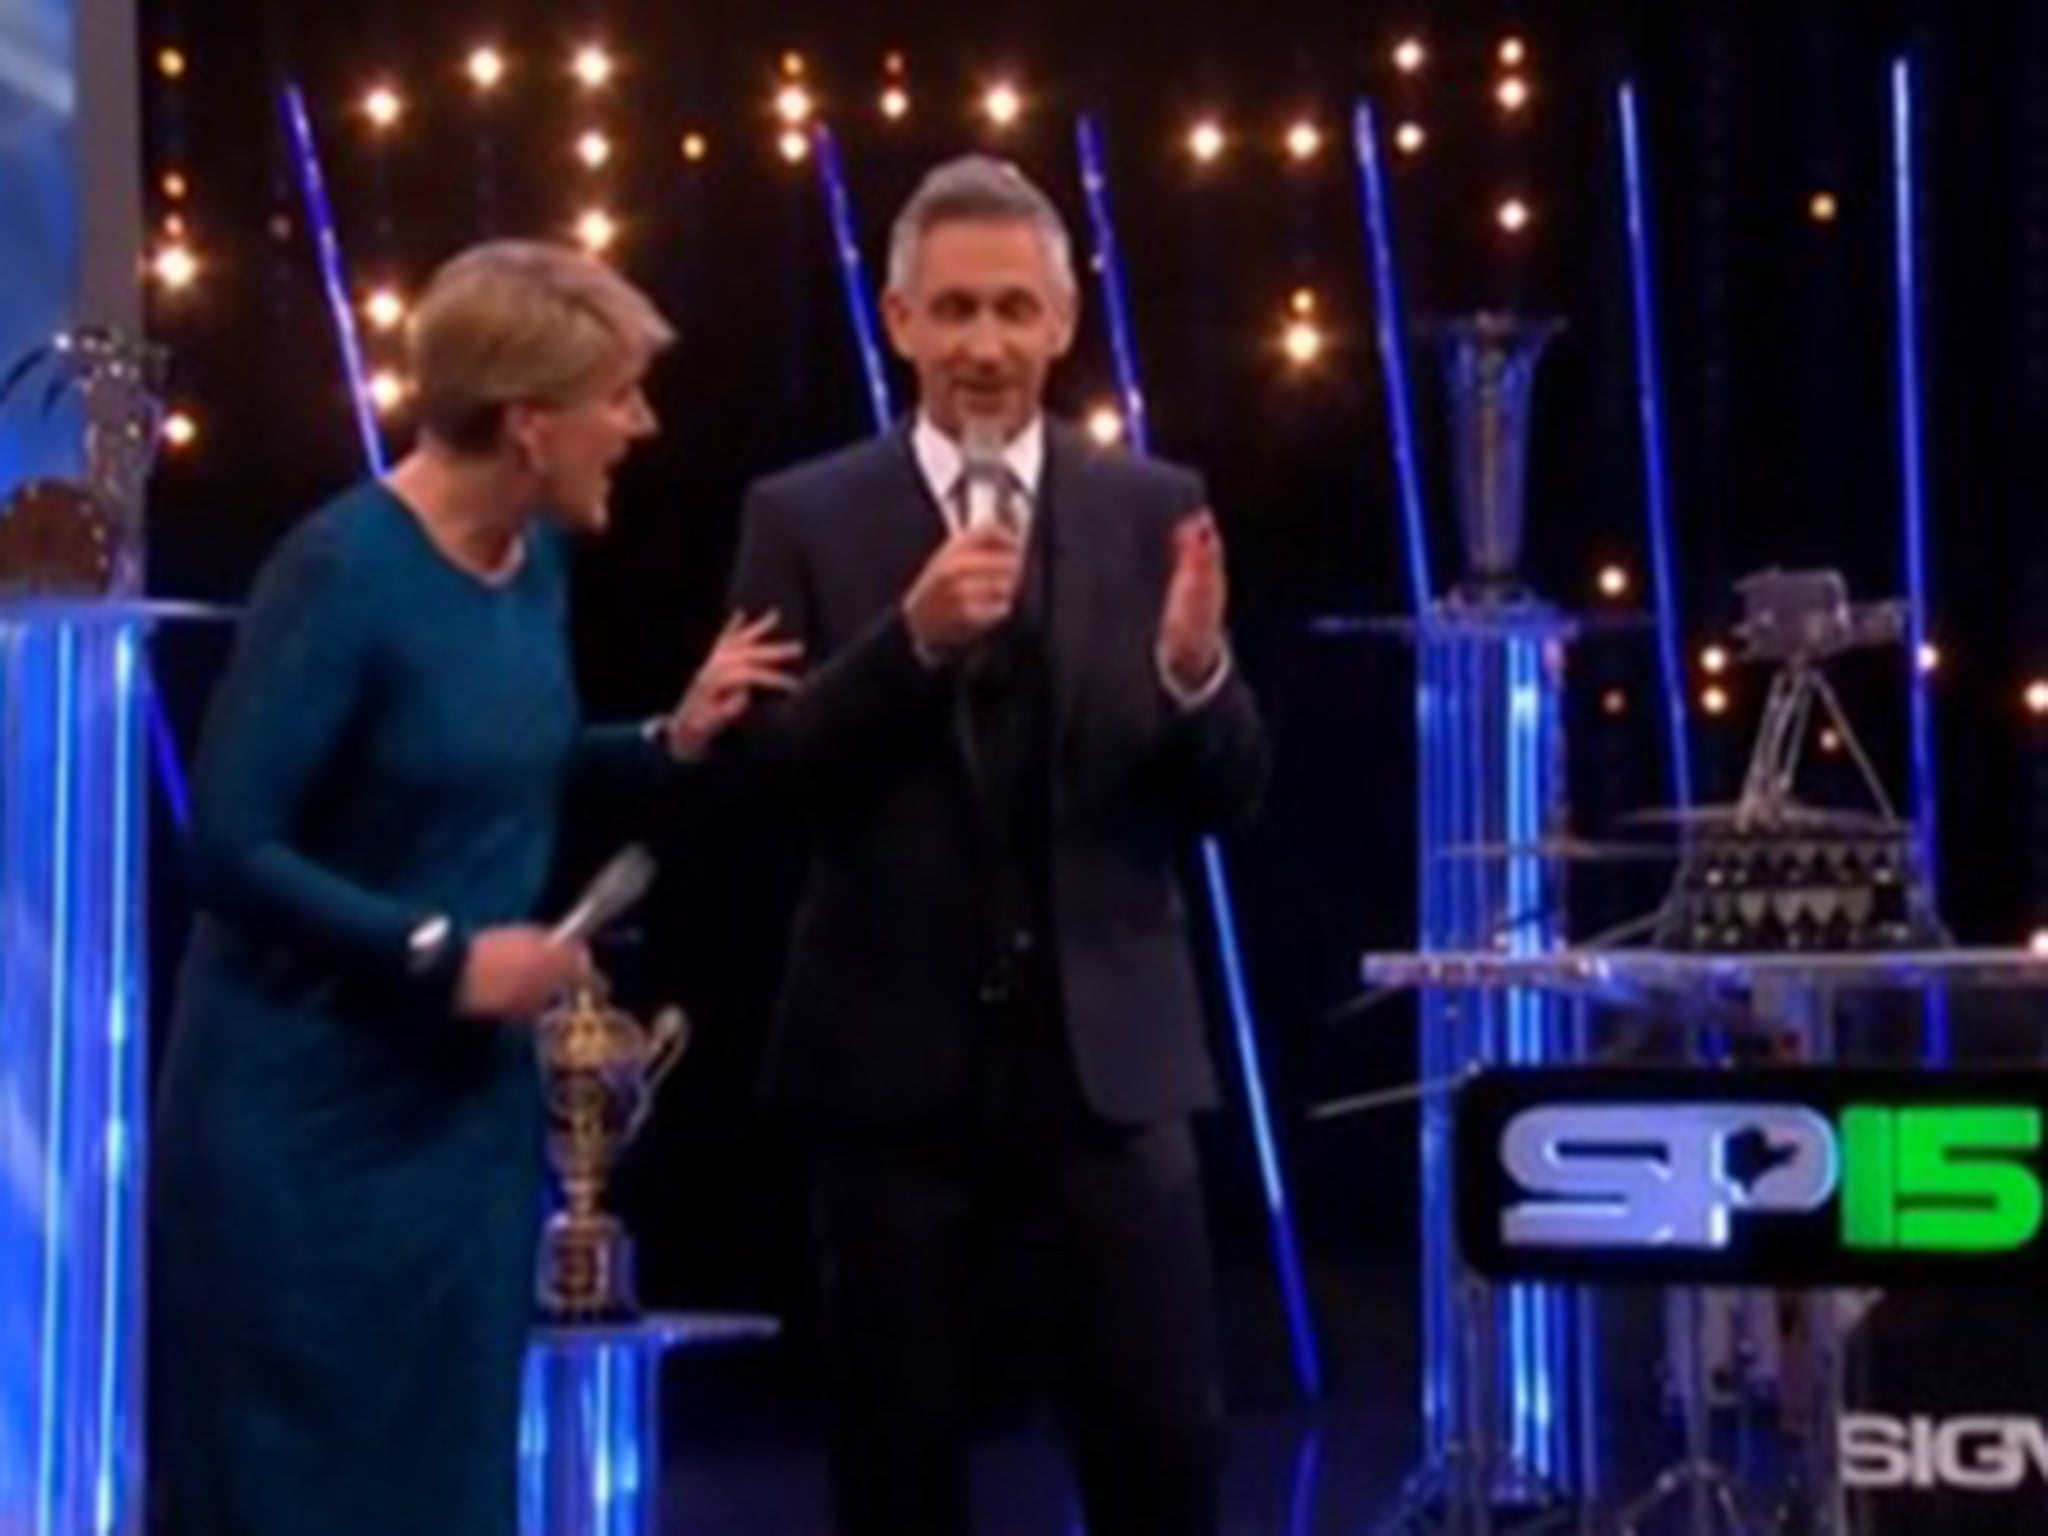 Clare Balding on stage with the bleeding Gary Lineker